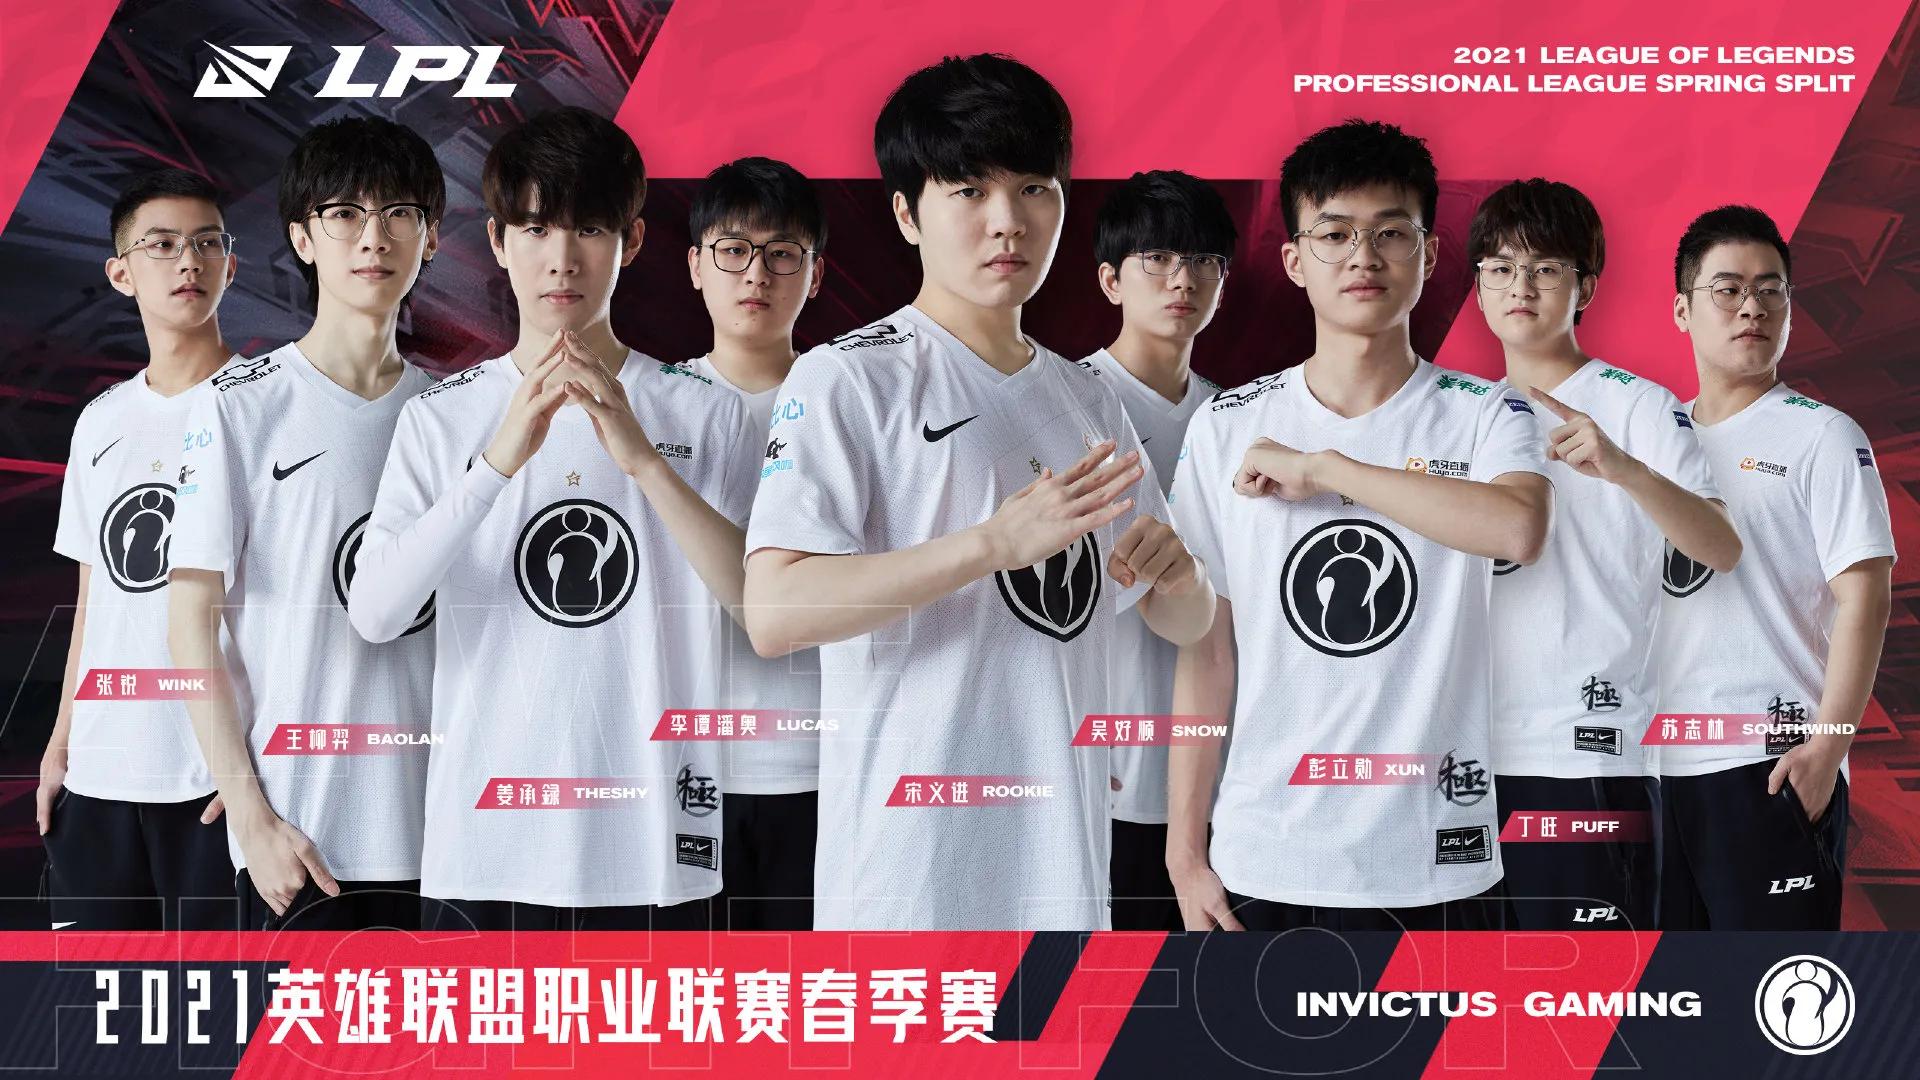 Analytic Lpl2021 spring surpasses actual strength of each battle group